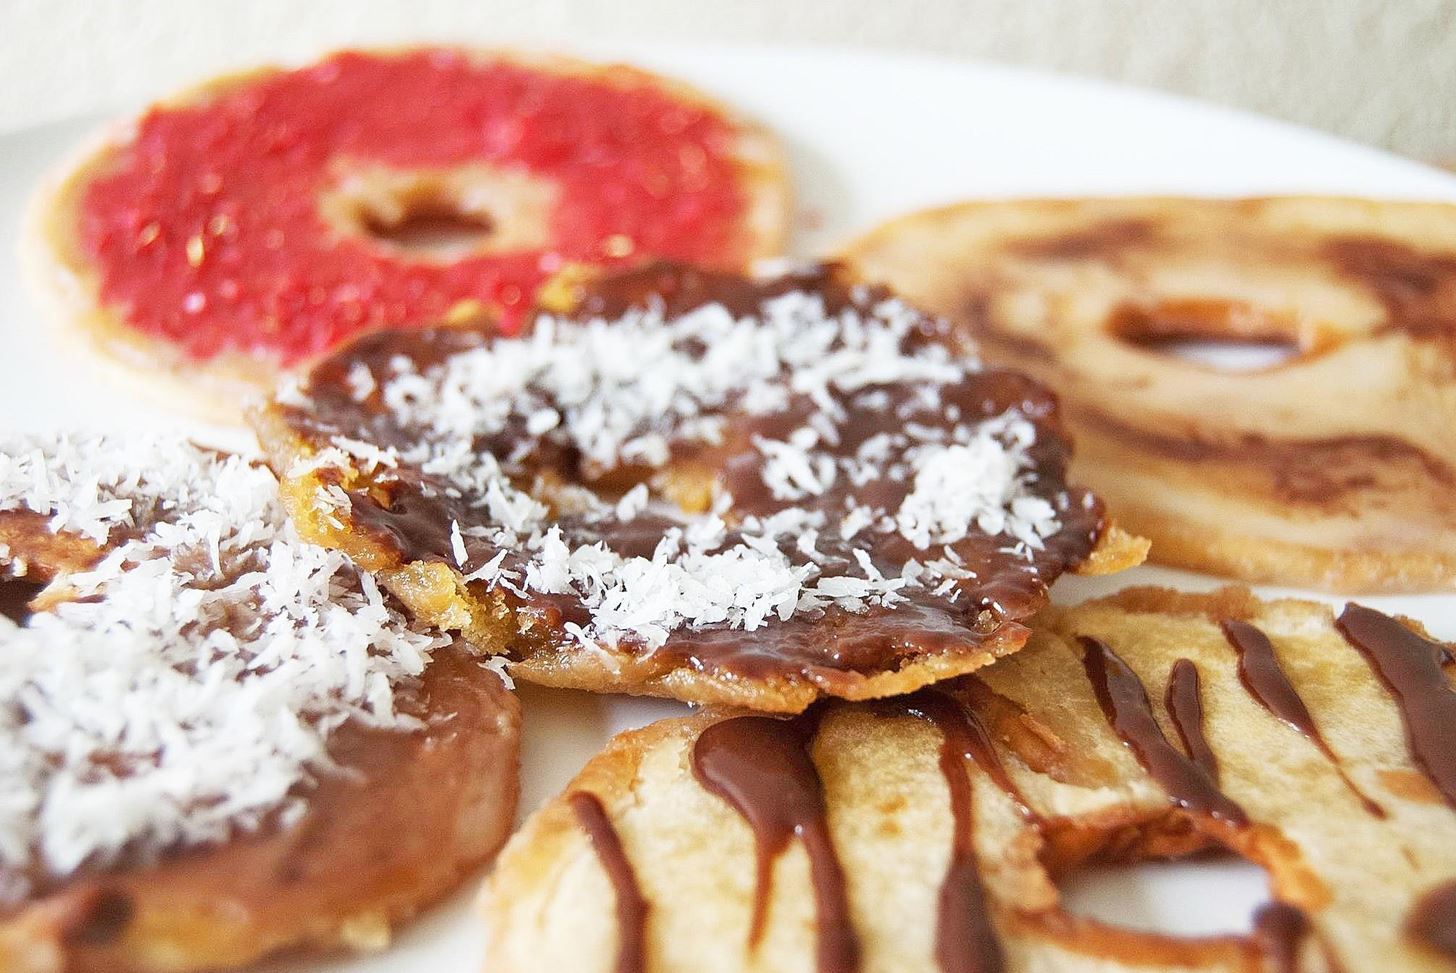 Give Stale Donuts a Crispy New Life by Turning Them into Chips